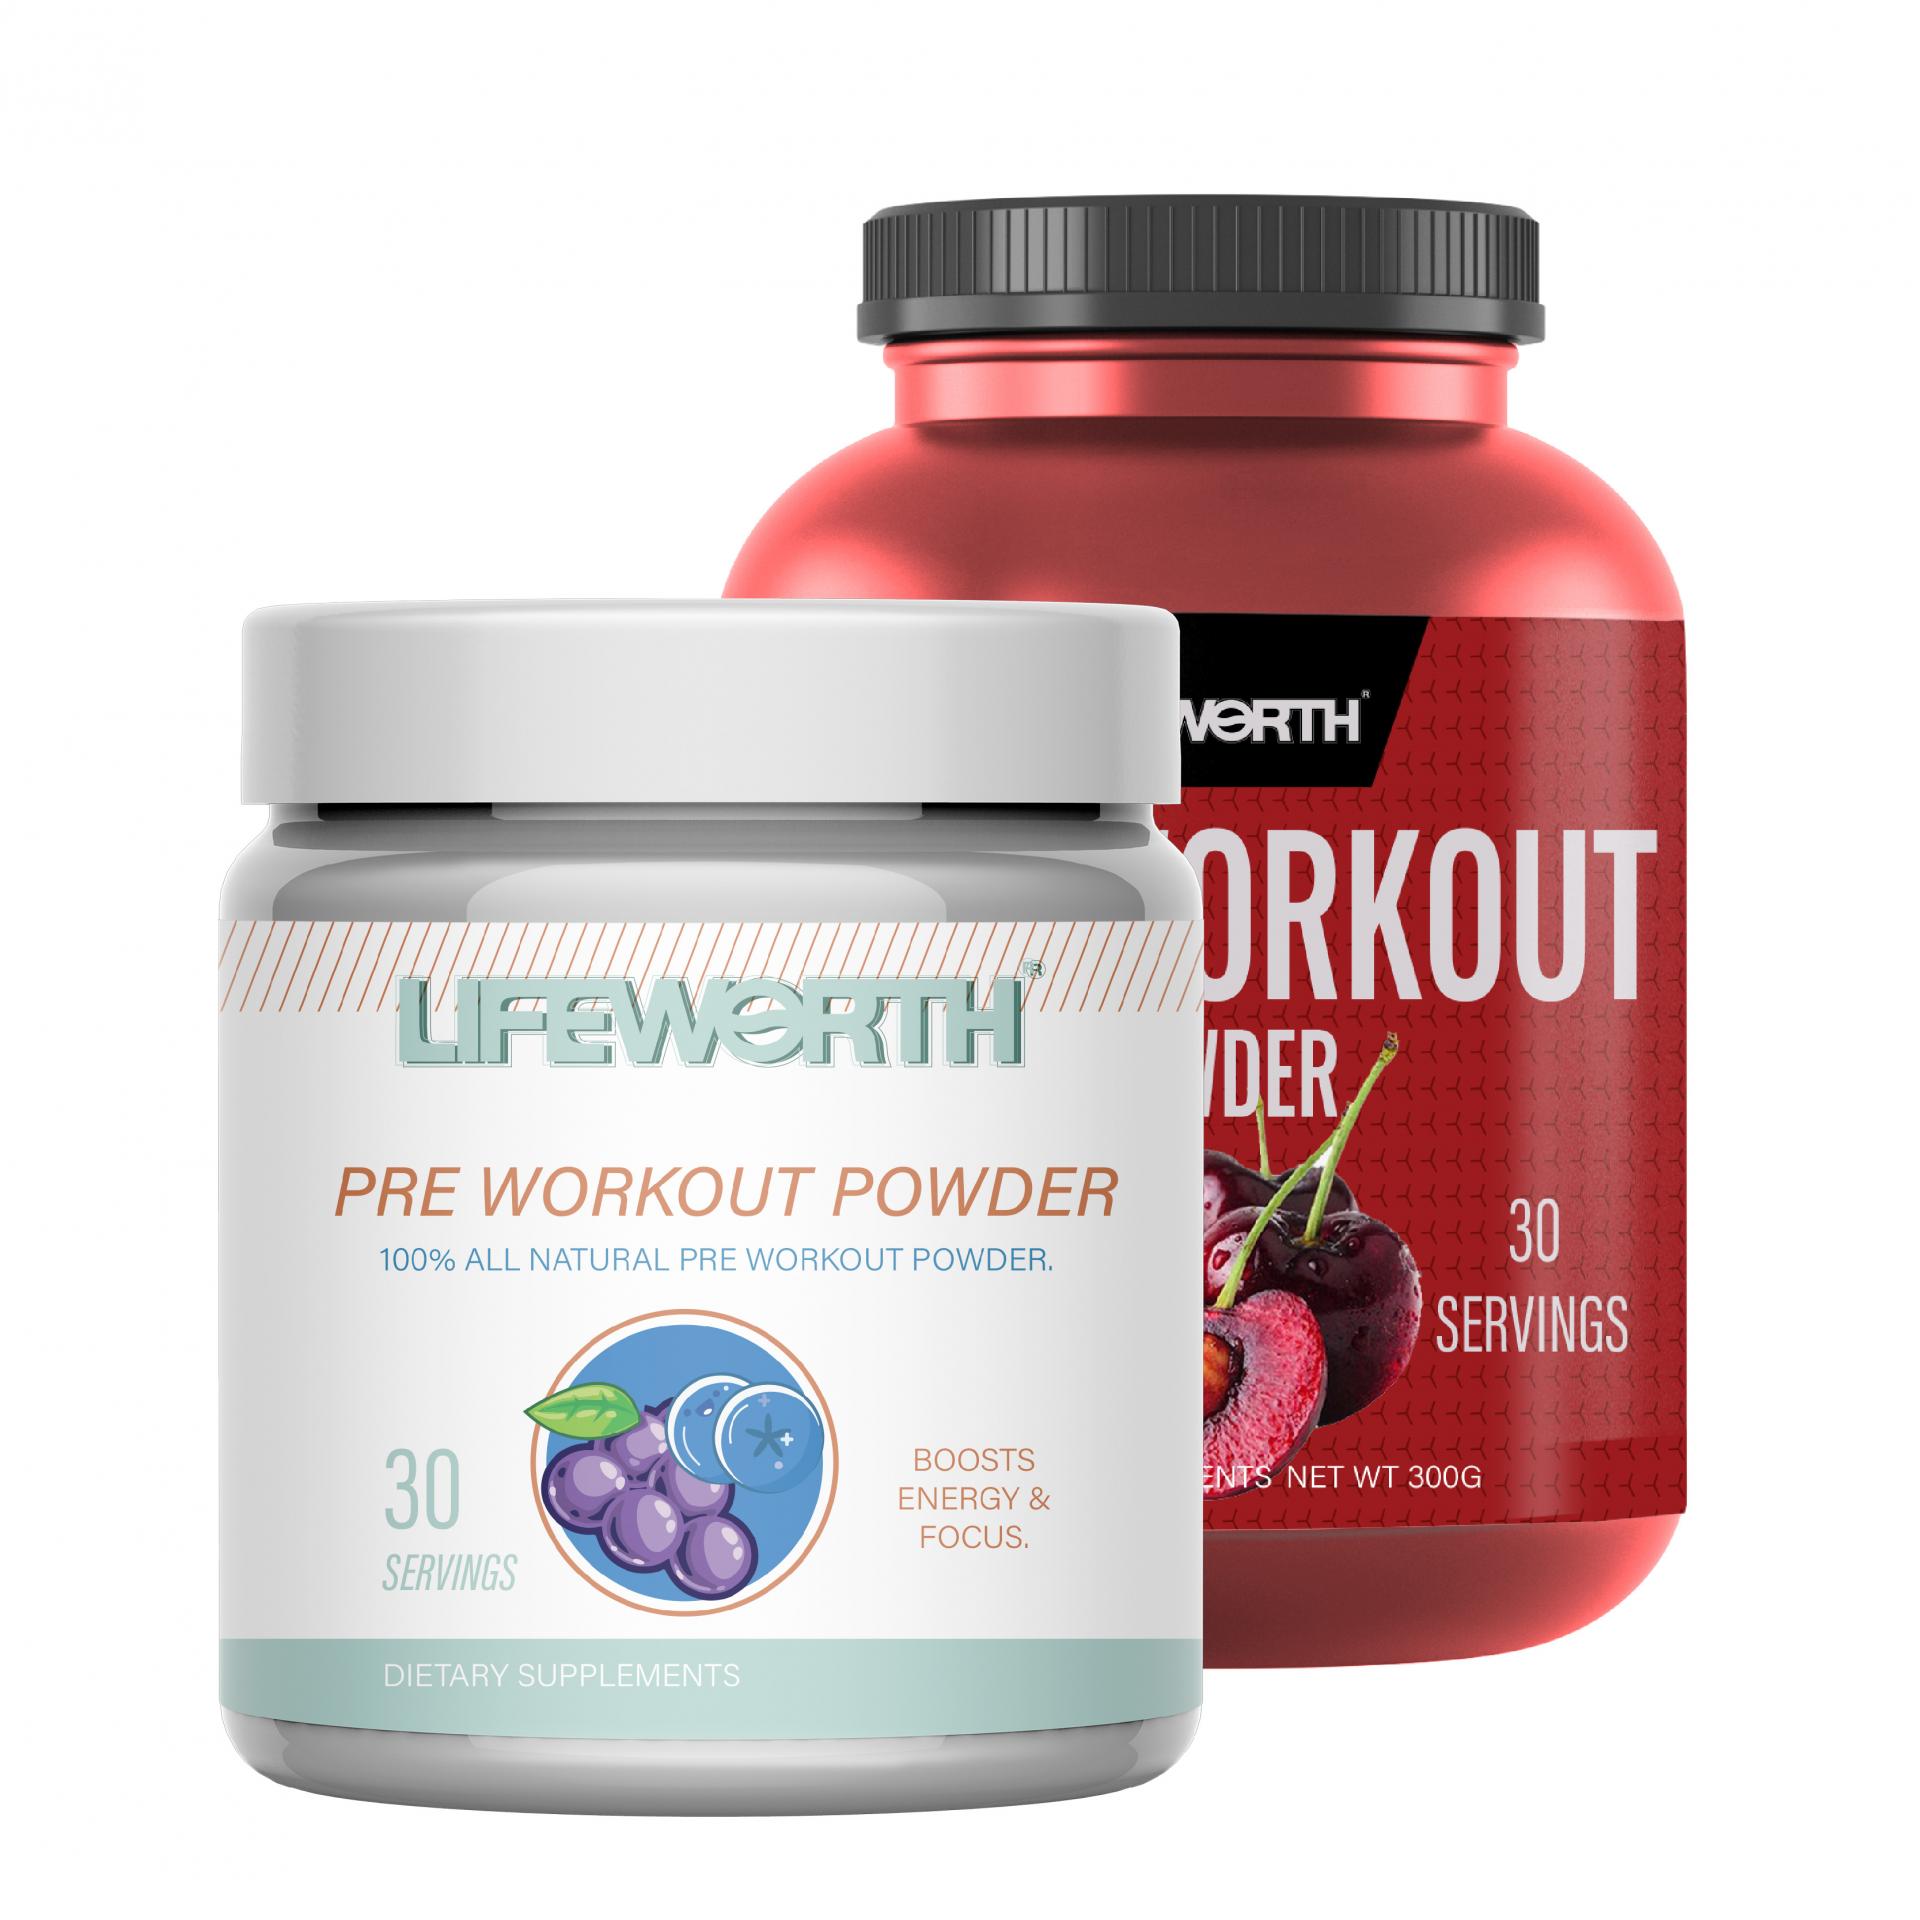 Certified for Sport Pre-workout for Men and Women